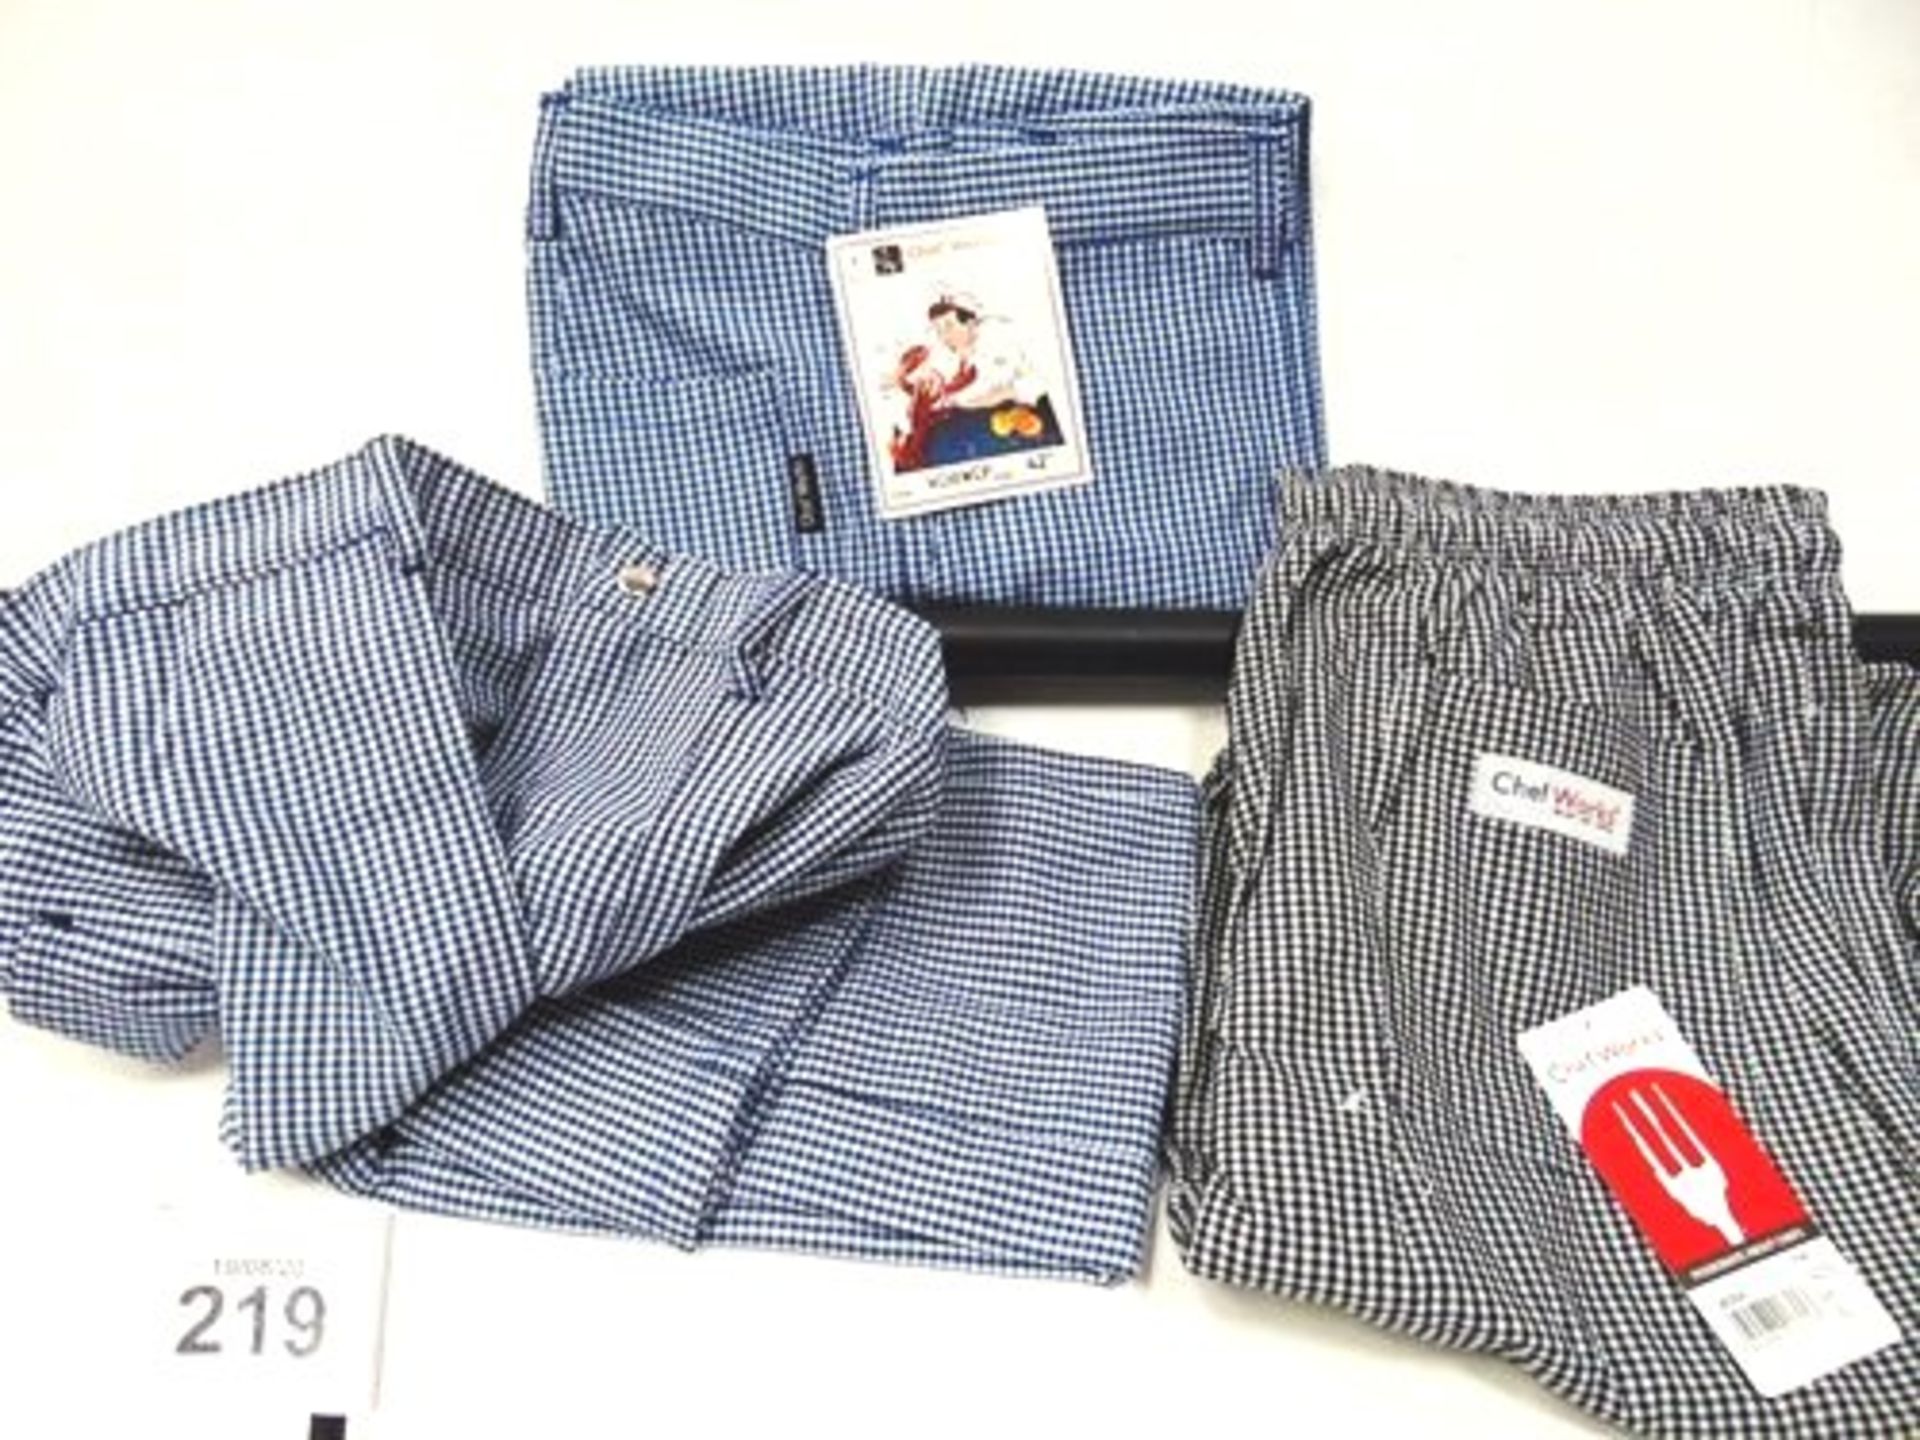 20 x pairs of chef check design trousers including Chef Works, in various sizes - New (ES14)